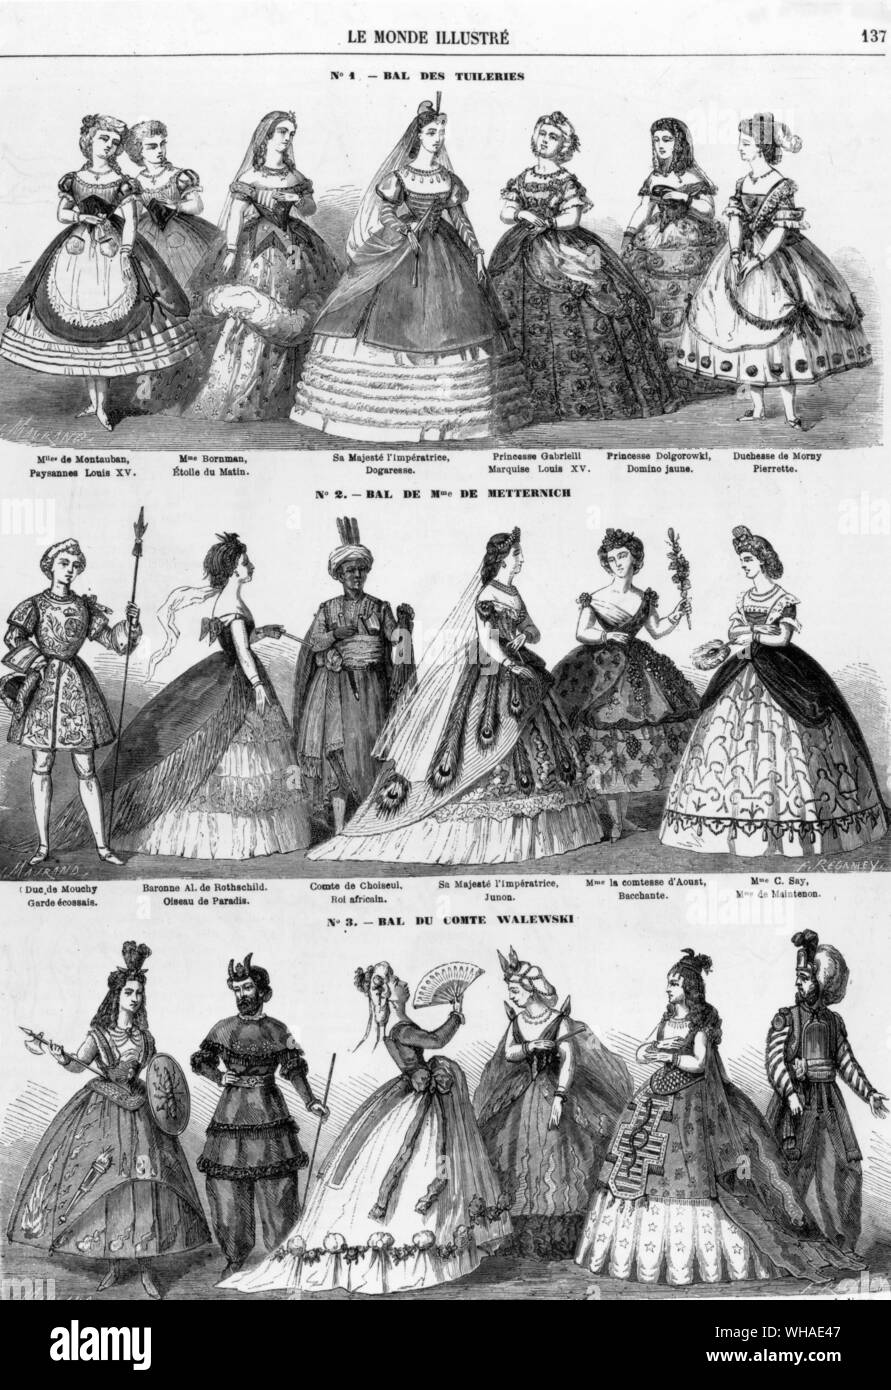 From Le Monde Illustre 28th February 1863. Fancy dress costumes